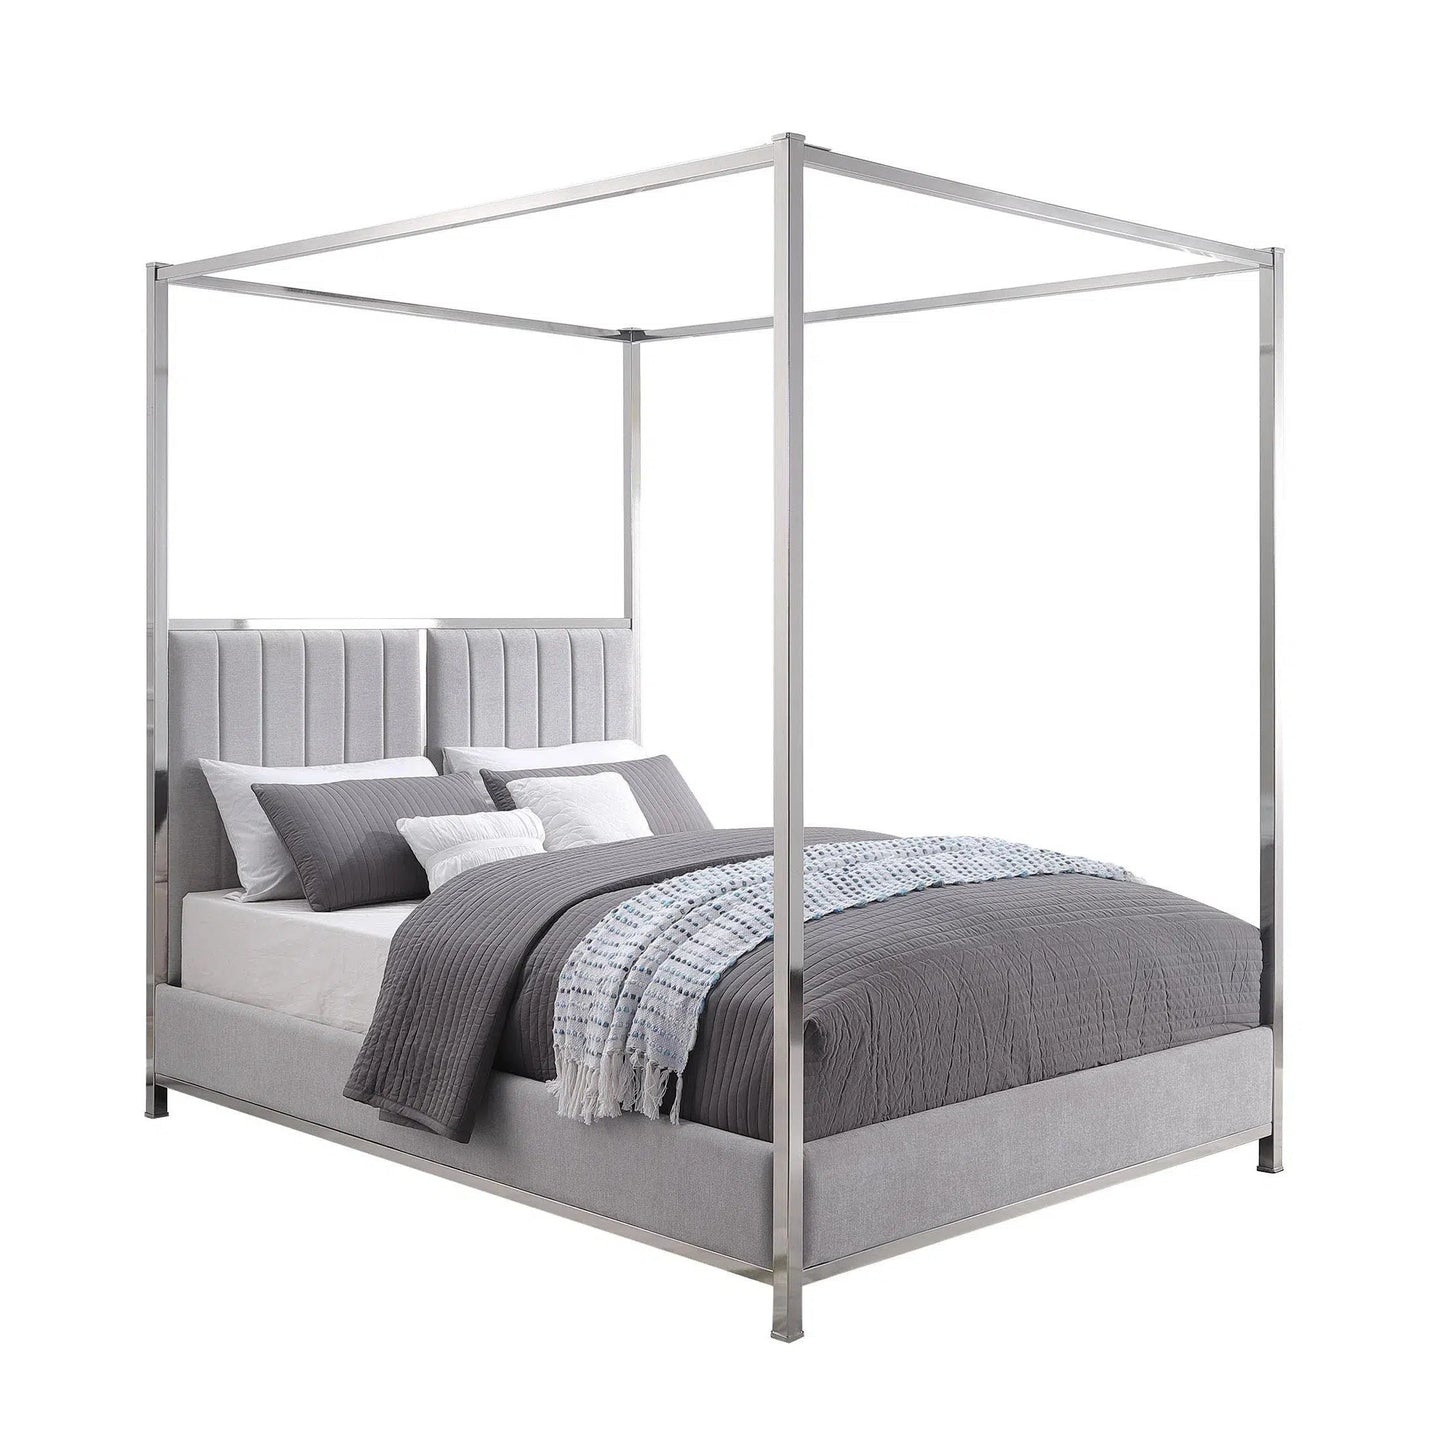 Kingston 4 Poster Bed with Fabric Upholsetered Bedhead-Sleep Doctor